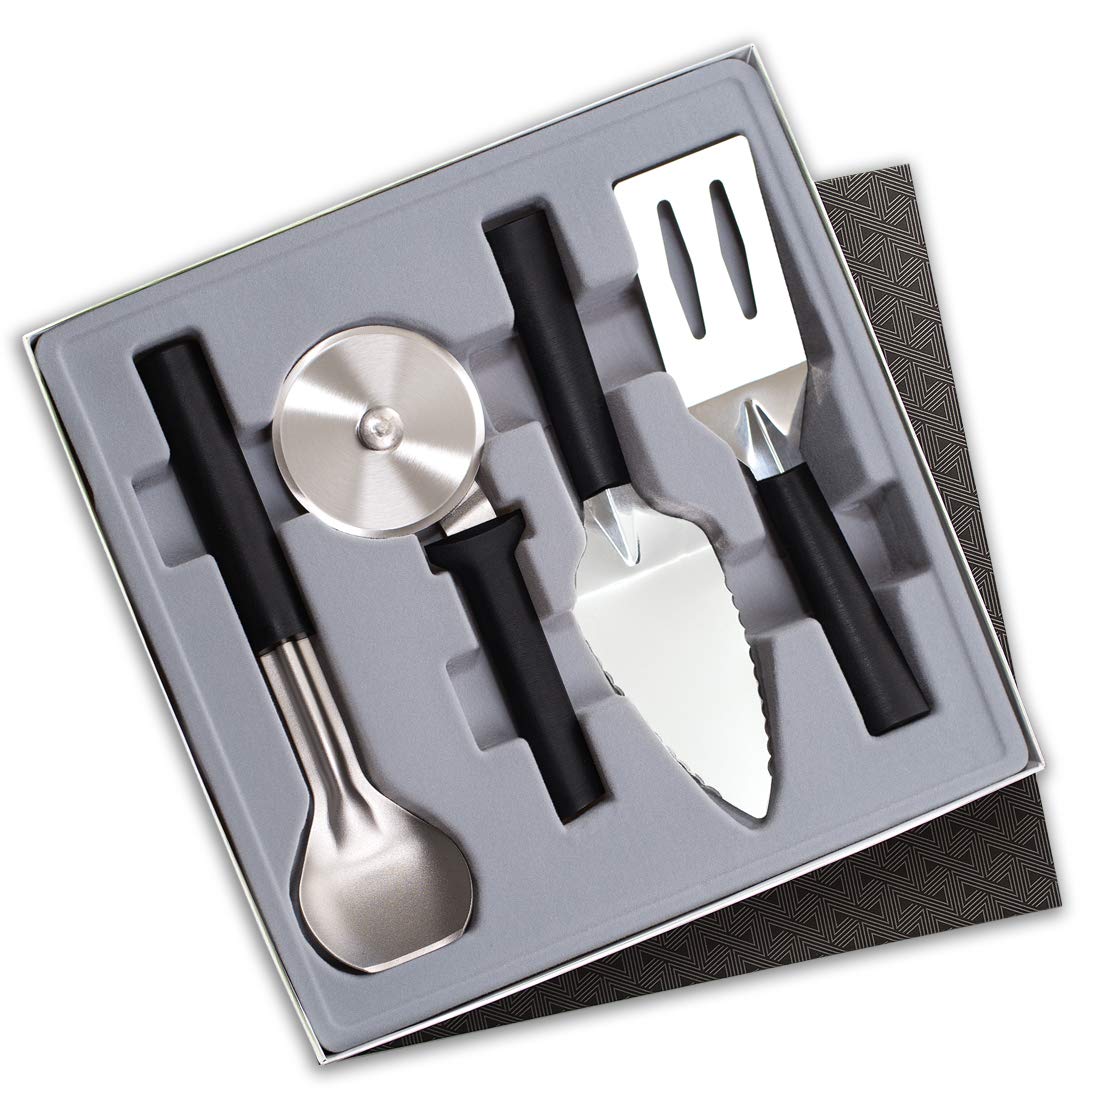 Rada Cutlery 4-Piece Kitchen Utensil Gift Set Stainless Steel Resin Made in USA, Black Handle